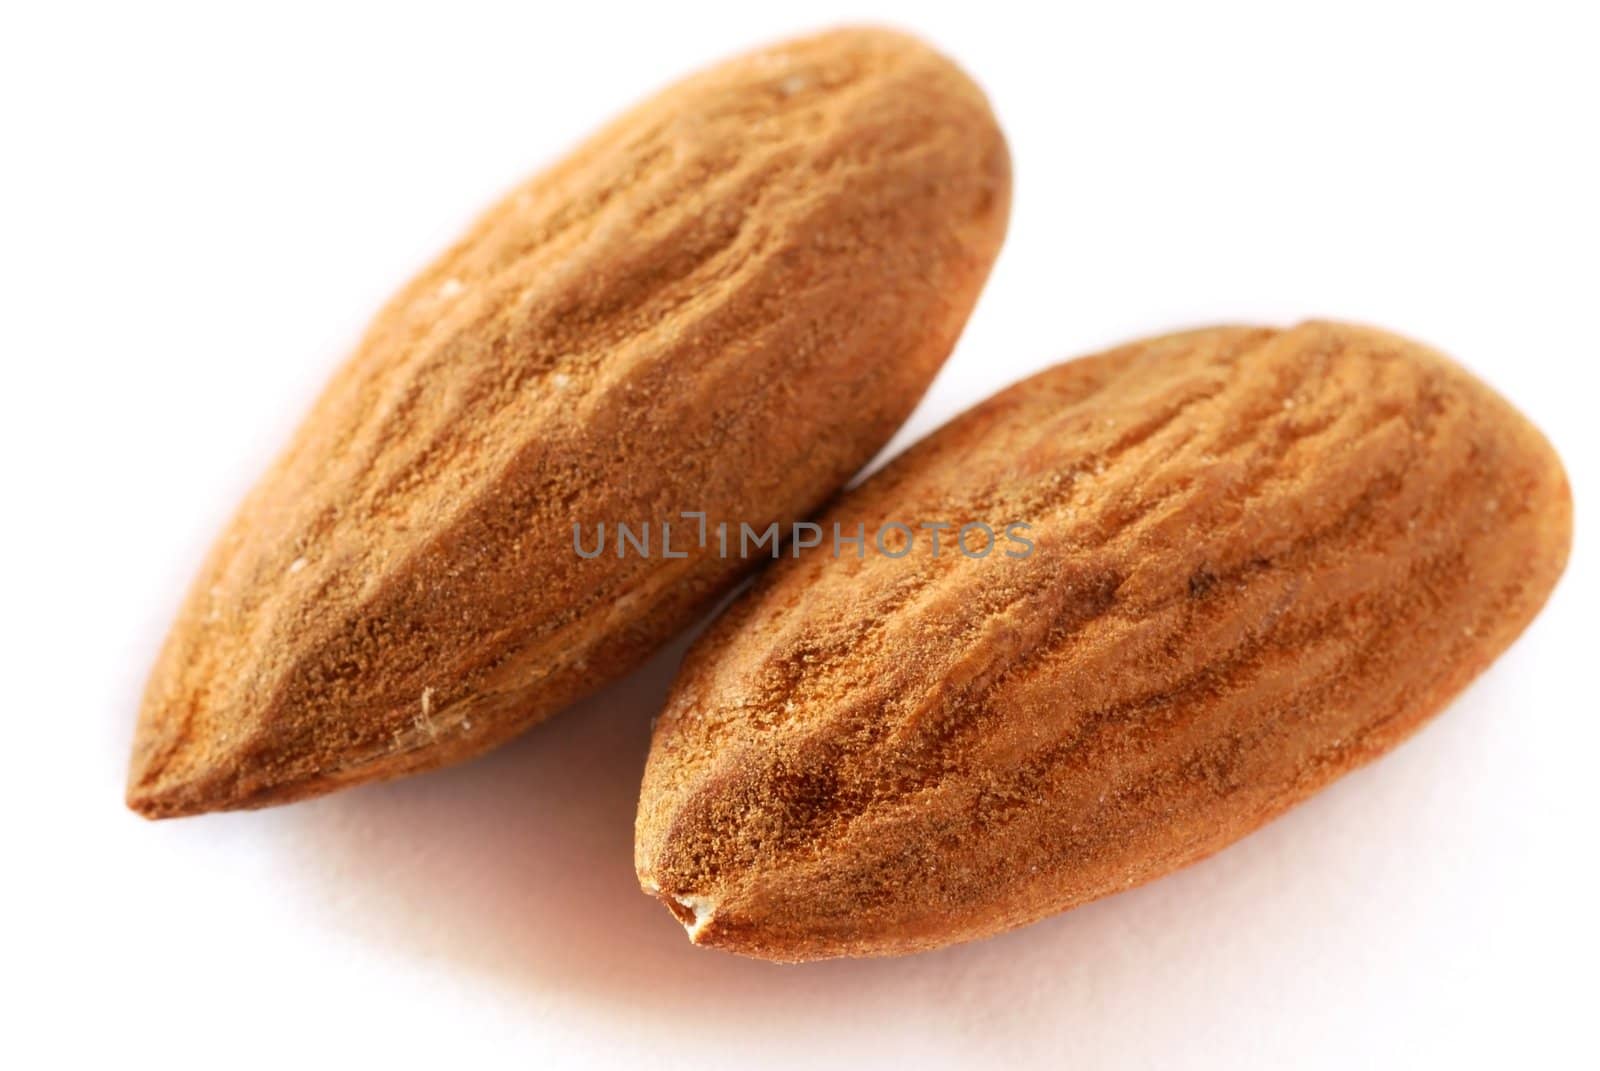 Almonds by simply